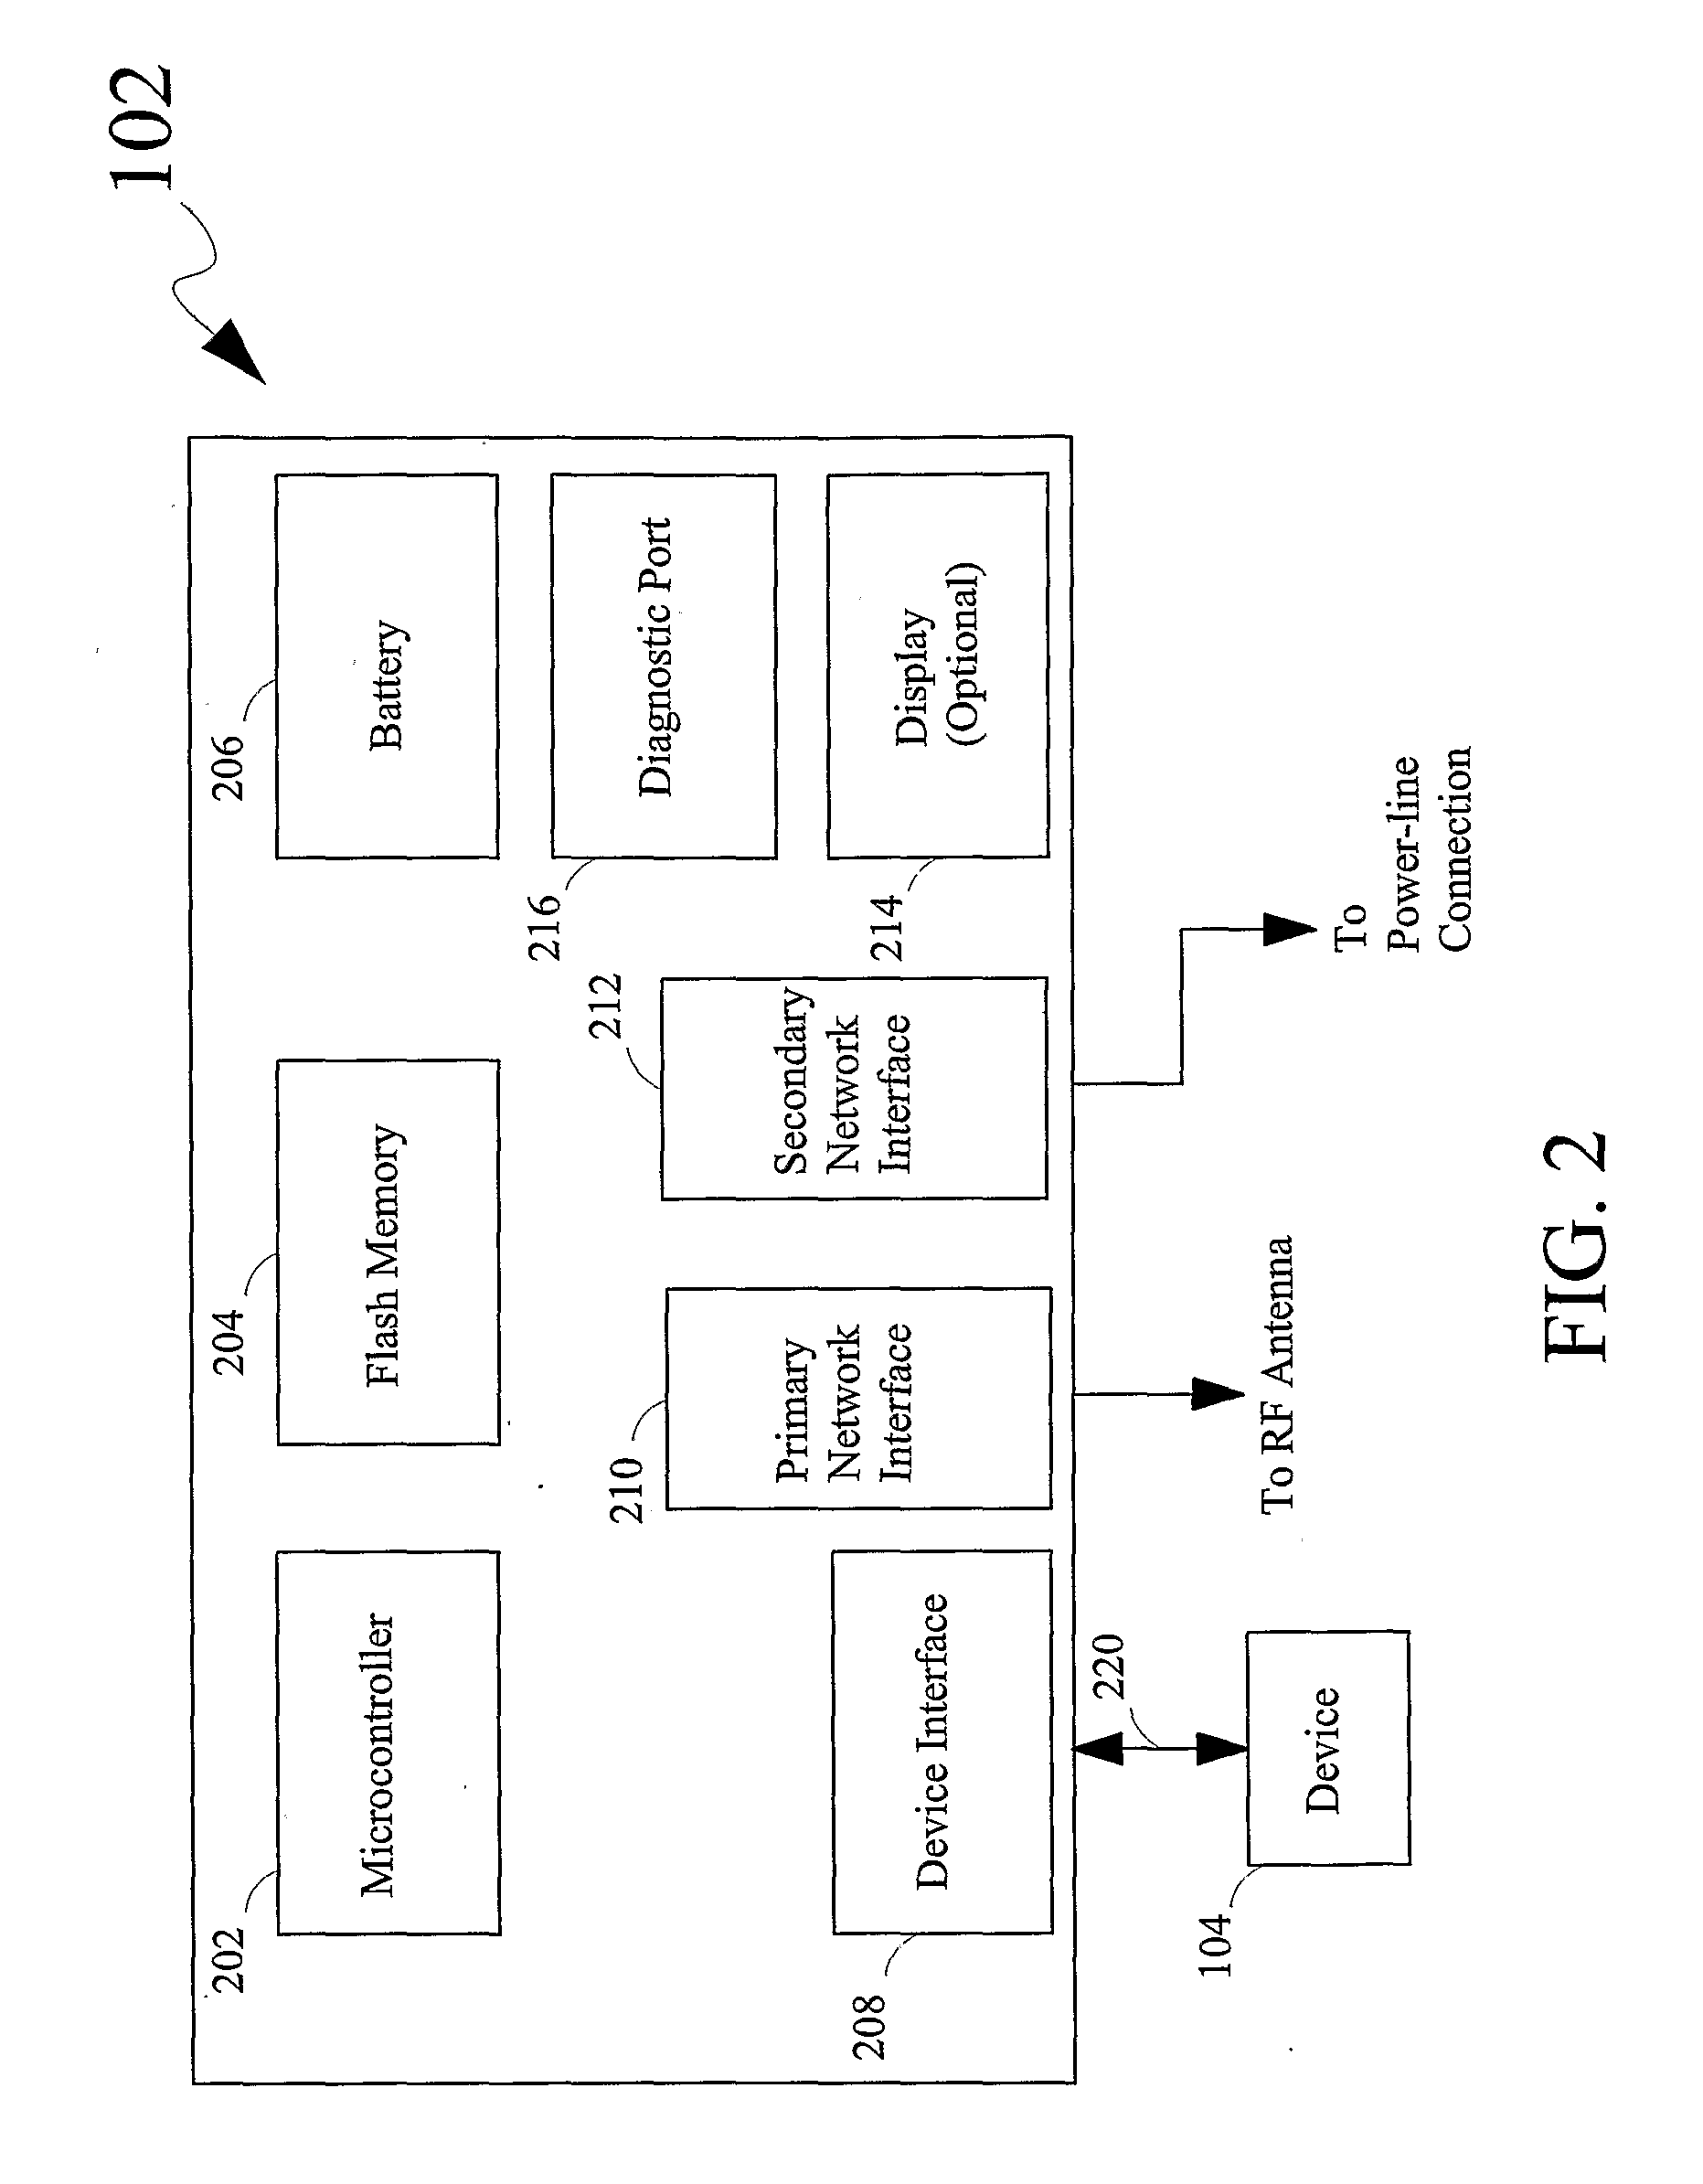 Home security system using an ad-hoc wireless mesh and method thereof